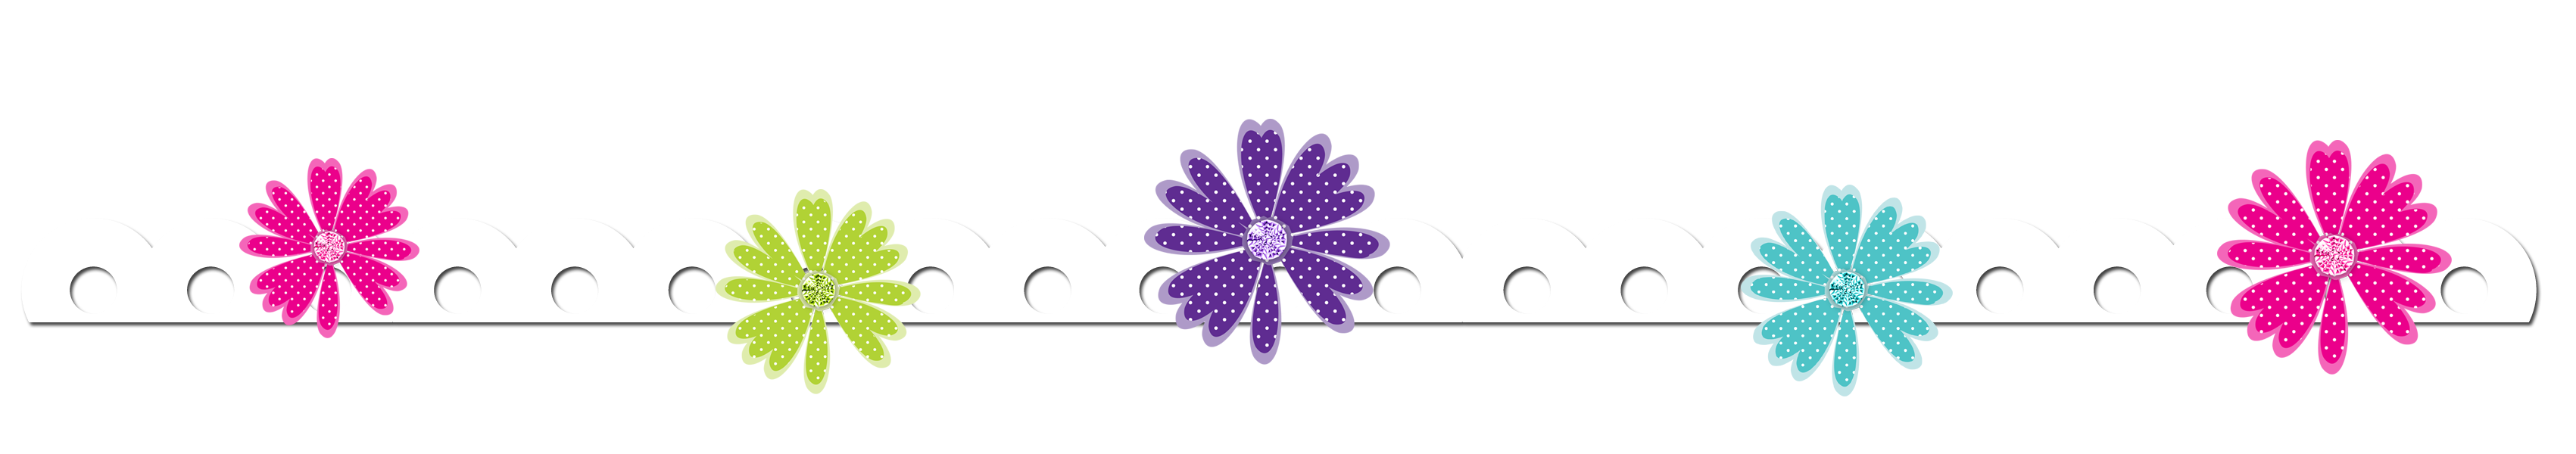 Flower border clip art free vector for free download about image 2